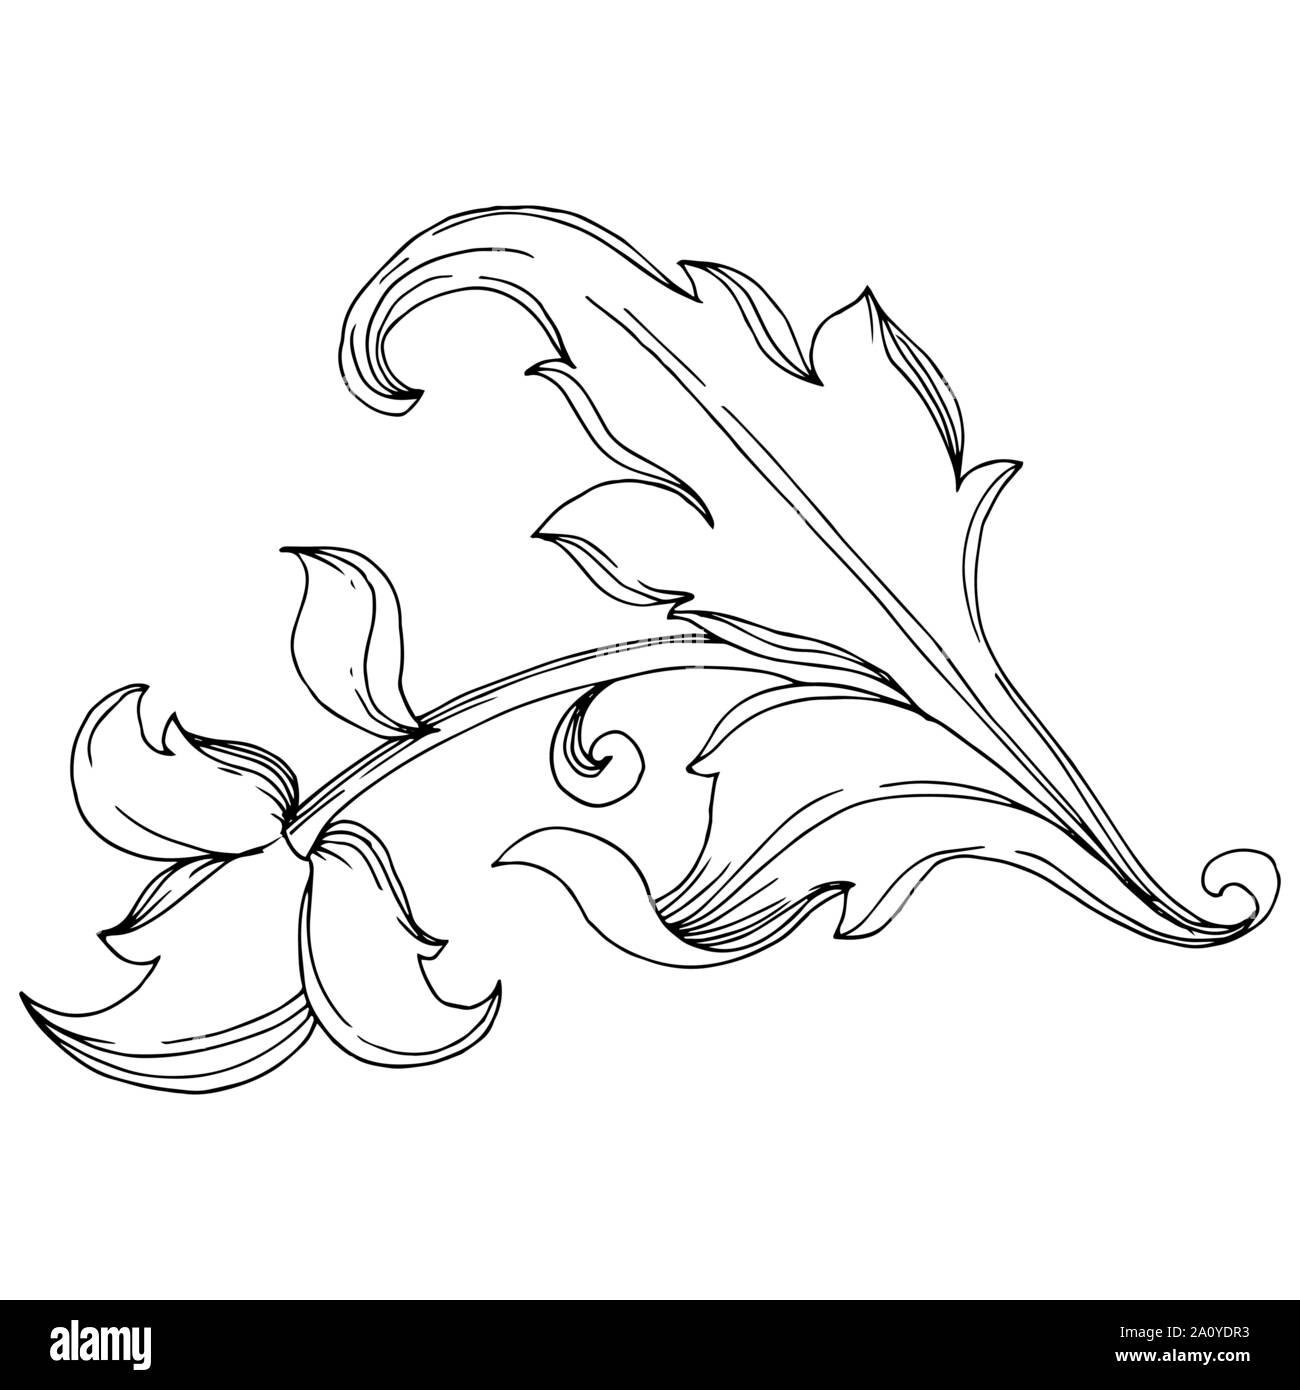 Vector Baroque monogram floral ornament. Baroque design isolated elements. Black and white engraved ink art. Isolated ornaments illustration element o Stock Vector